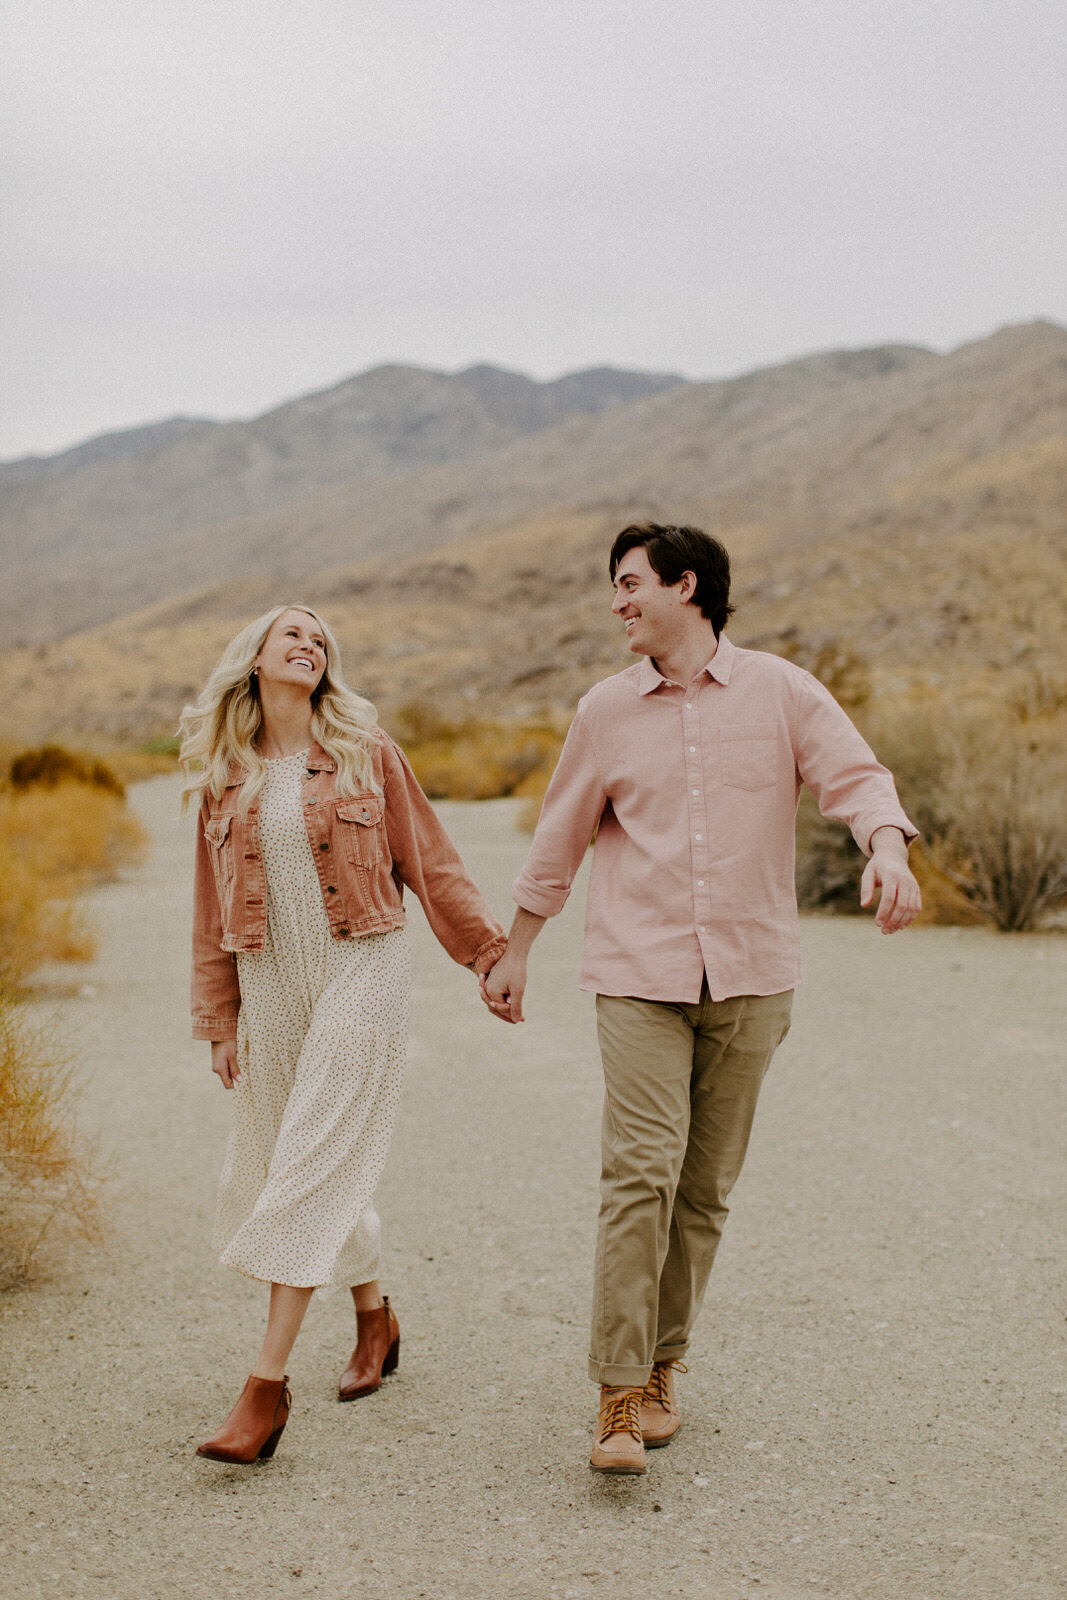 Brianna-Broyles-Photography-Pink-Palm-Springs-Engagement-Session-1.jpg